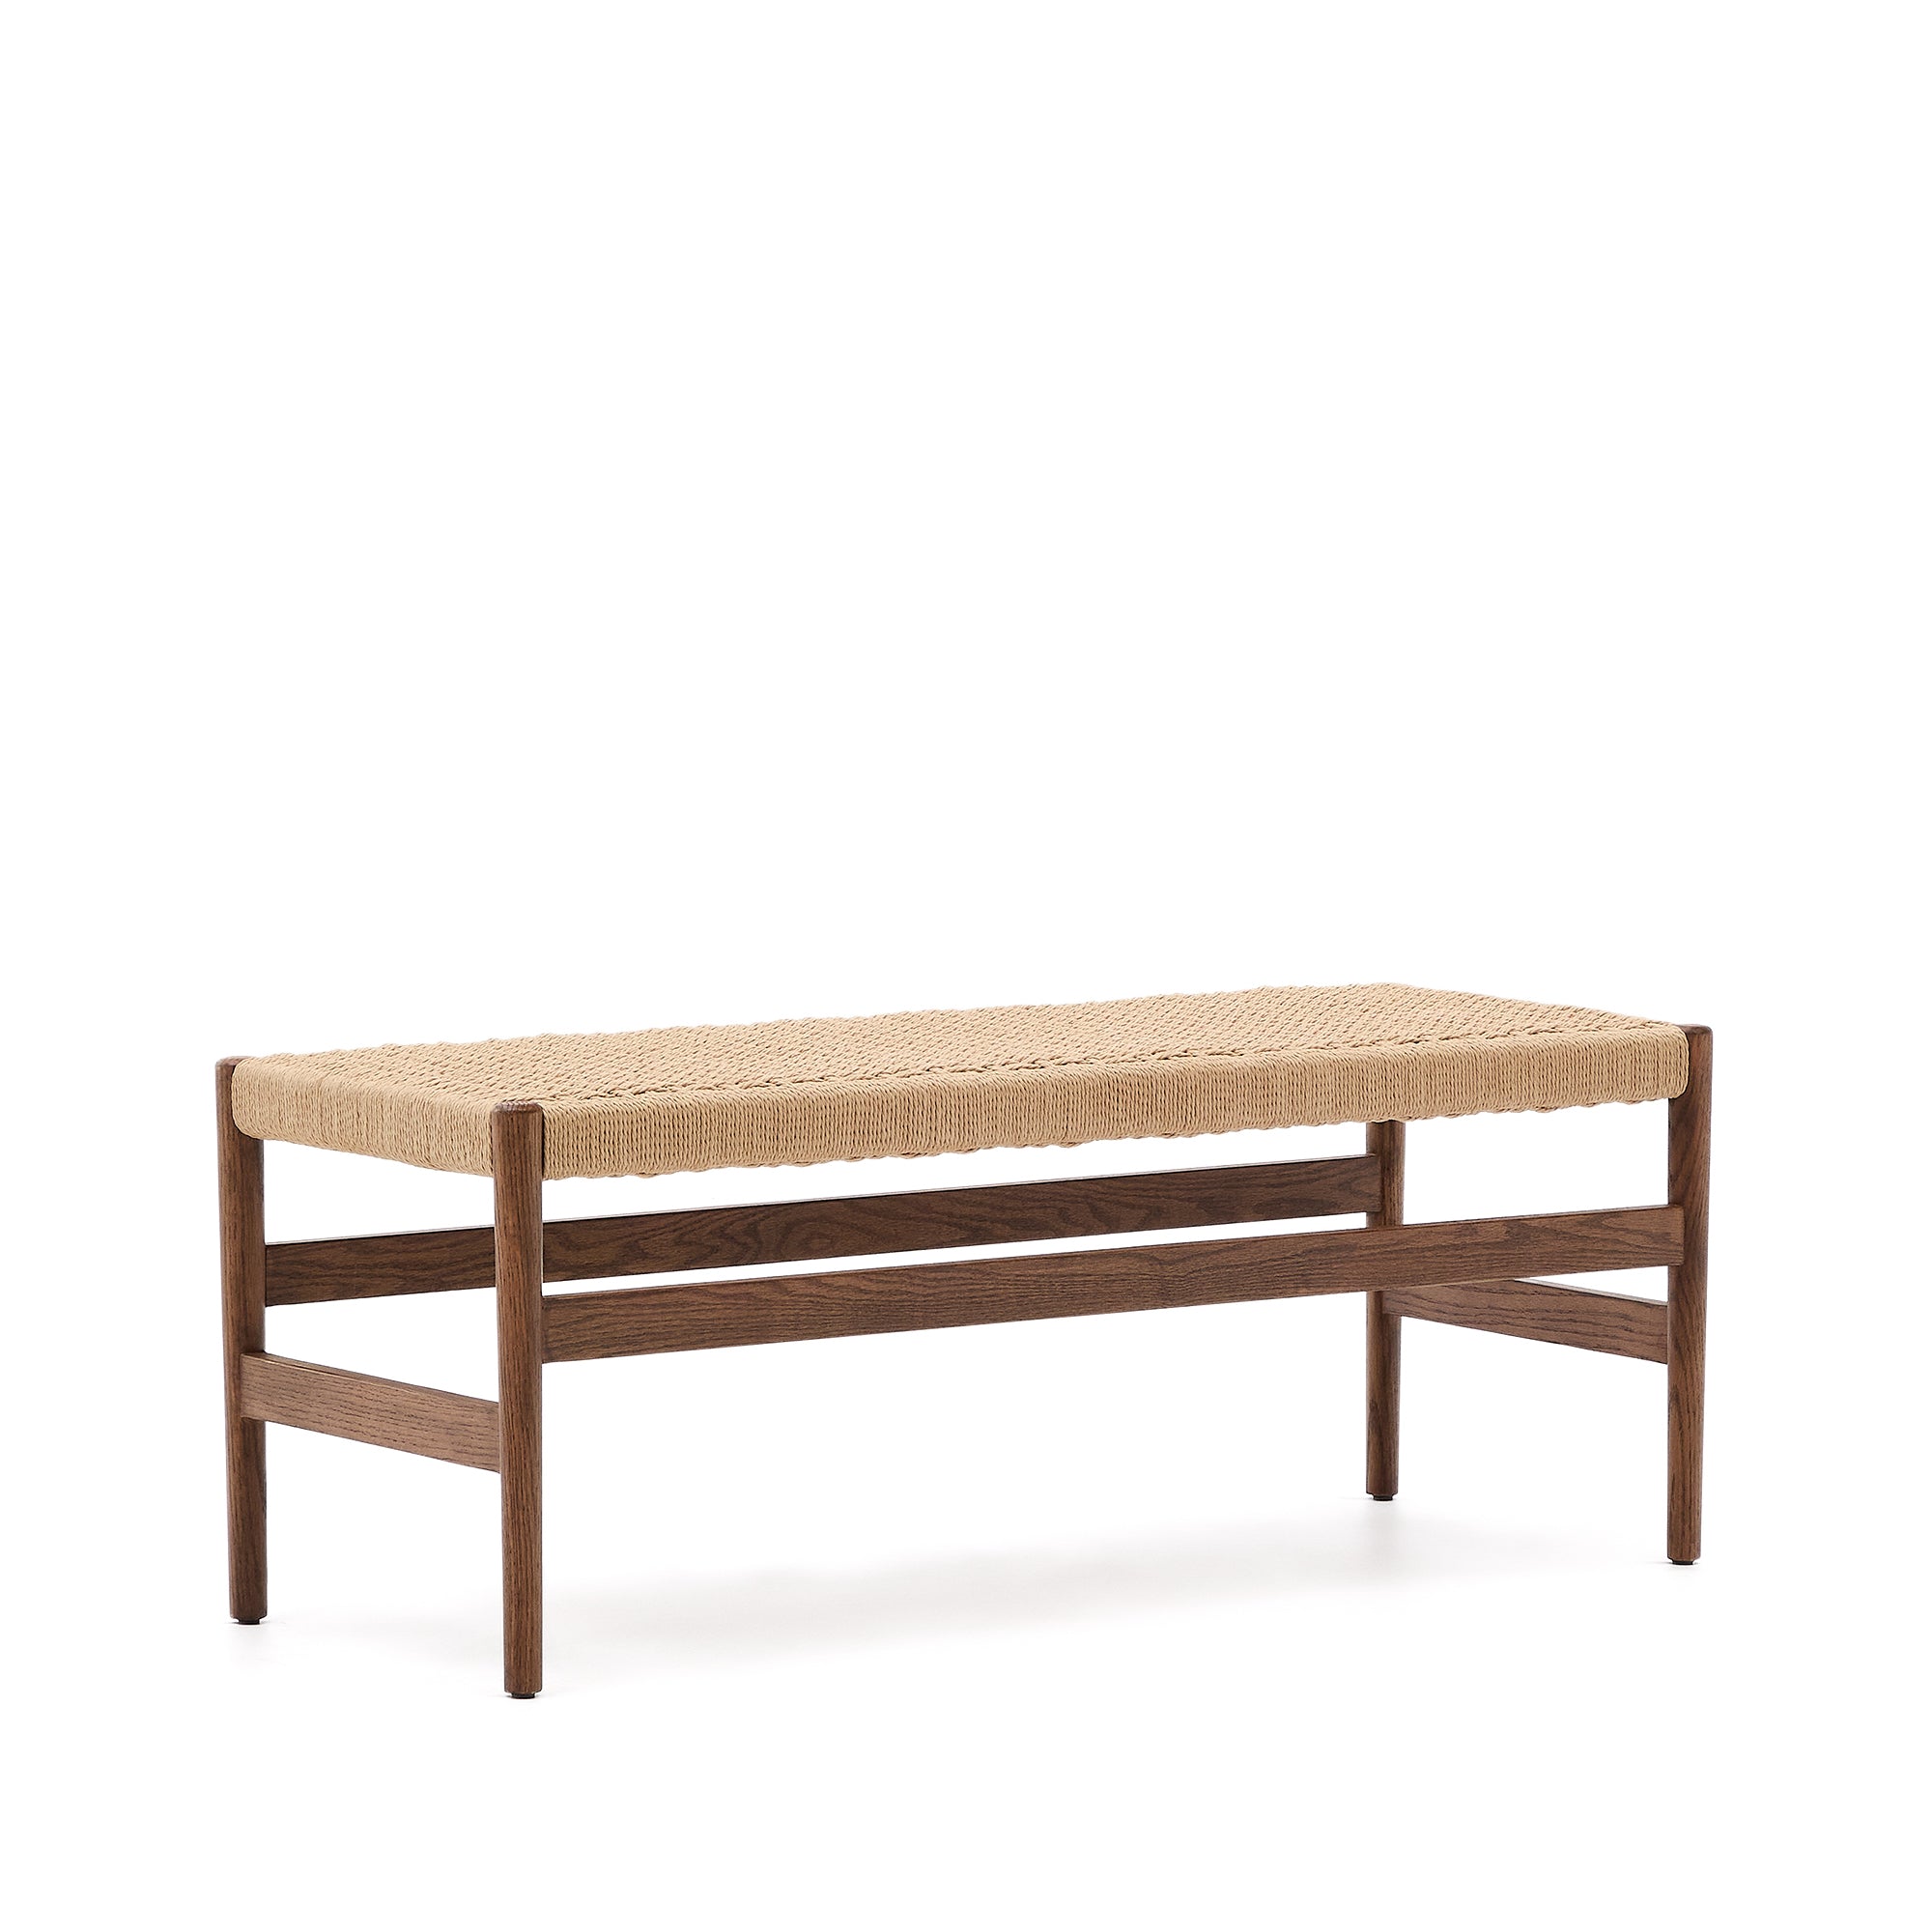 Zaide bench with solid oak structure, walnut finish and rope seat, 120 cm, 100% FSC